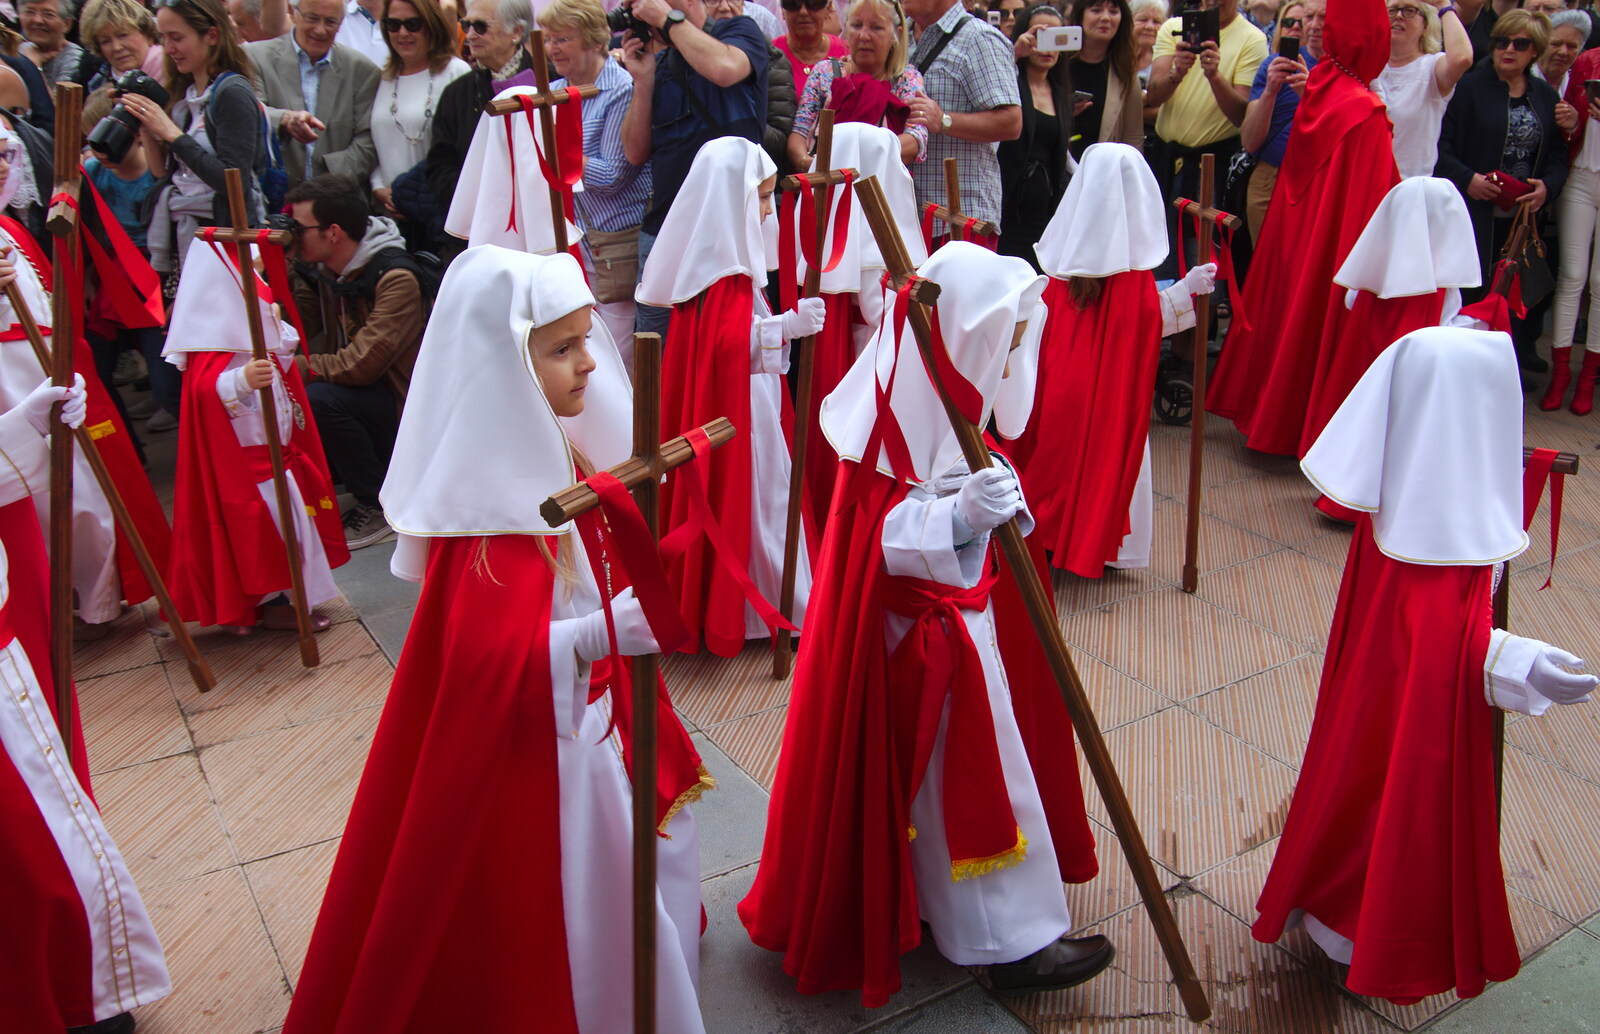 Red, white and crosses from An Easter Parade, Nerja, Andalusia, Spain - 21st April 2019